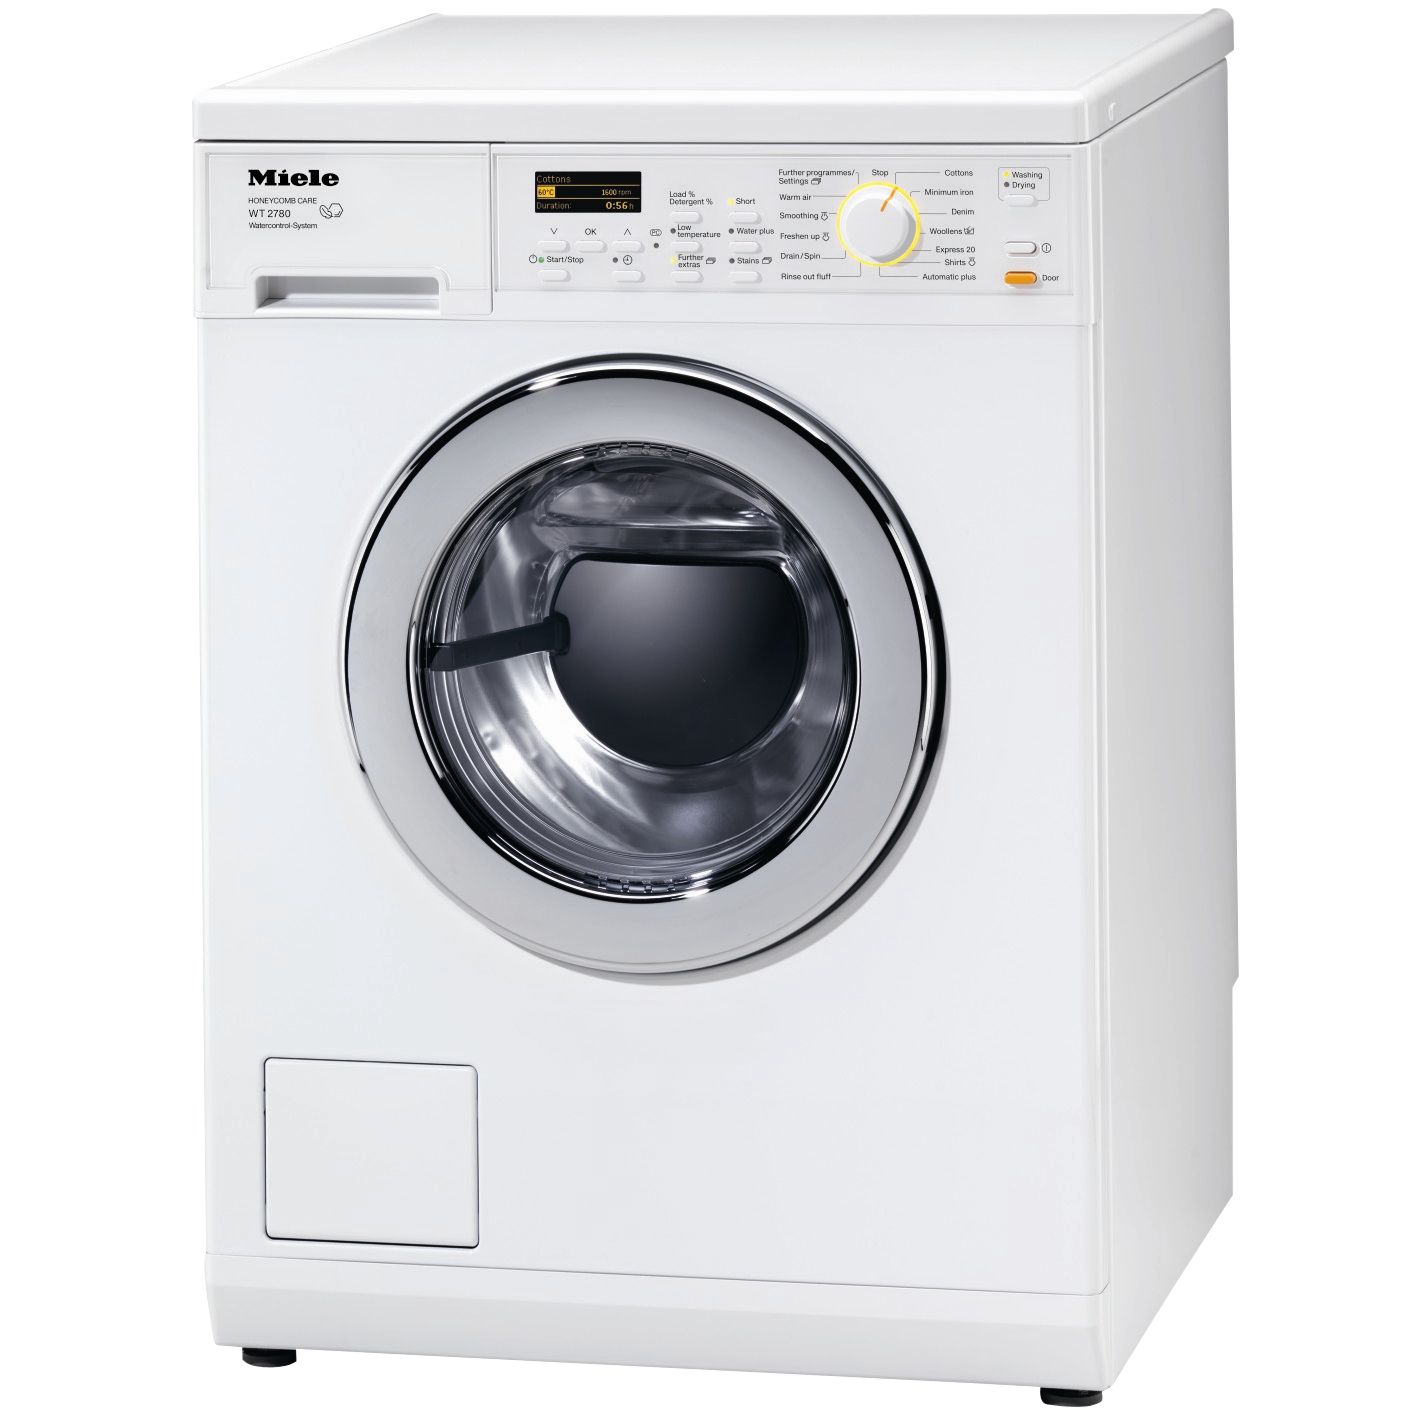 miele-wt2780-washer-dryer-5kg-wash-3kg-dry-load-a-energy-rating